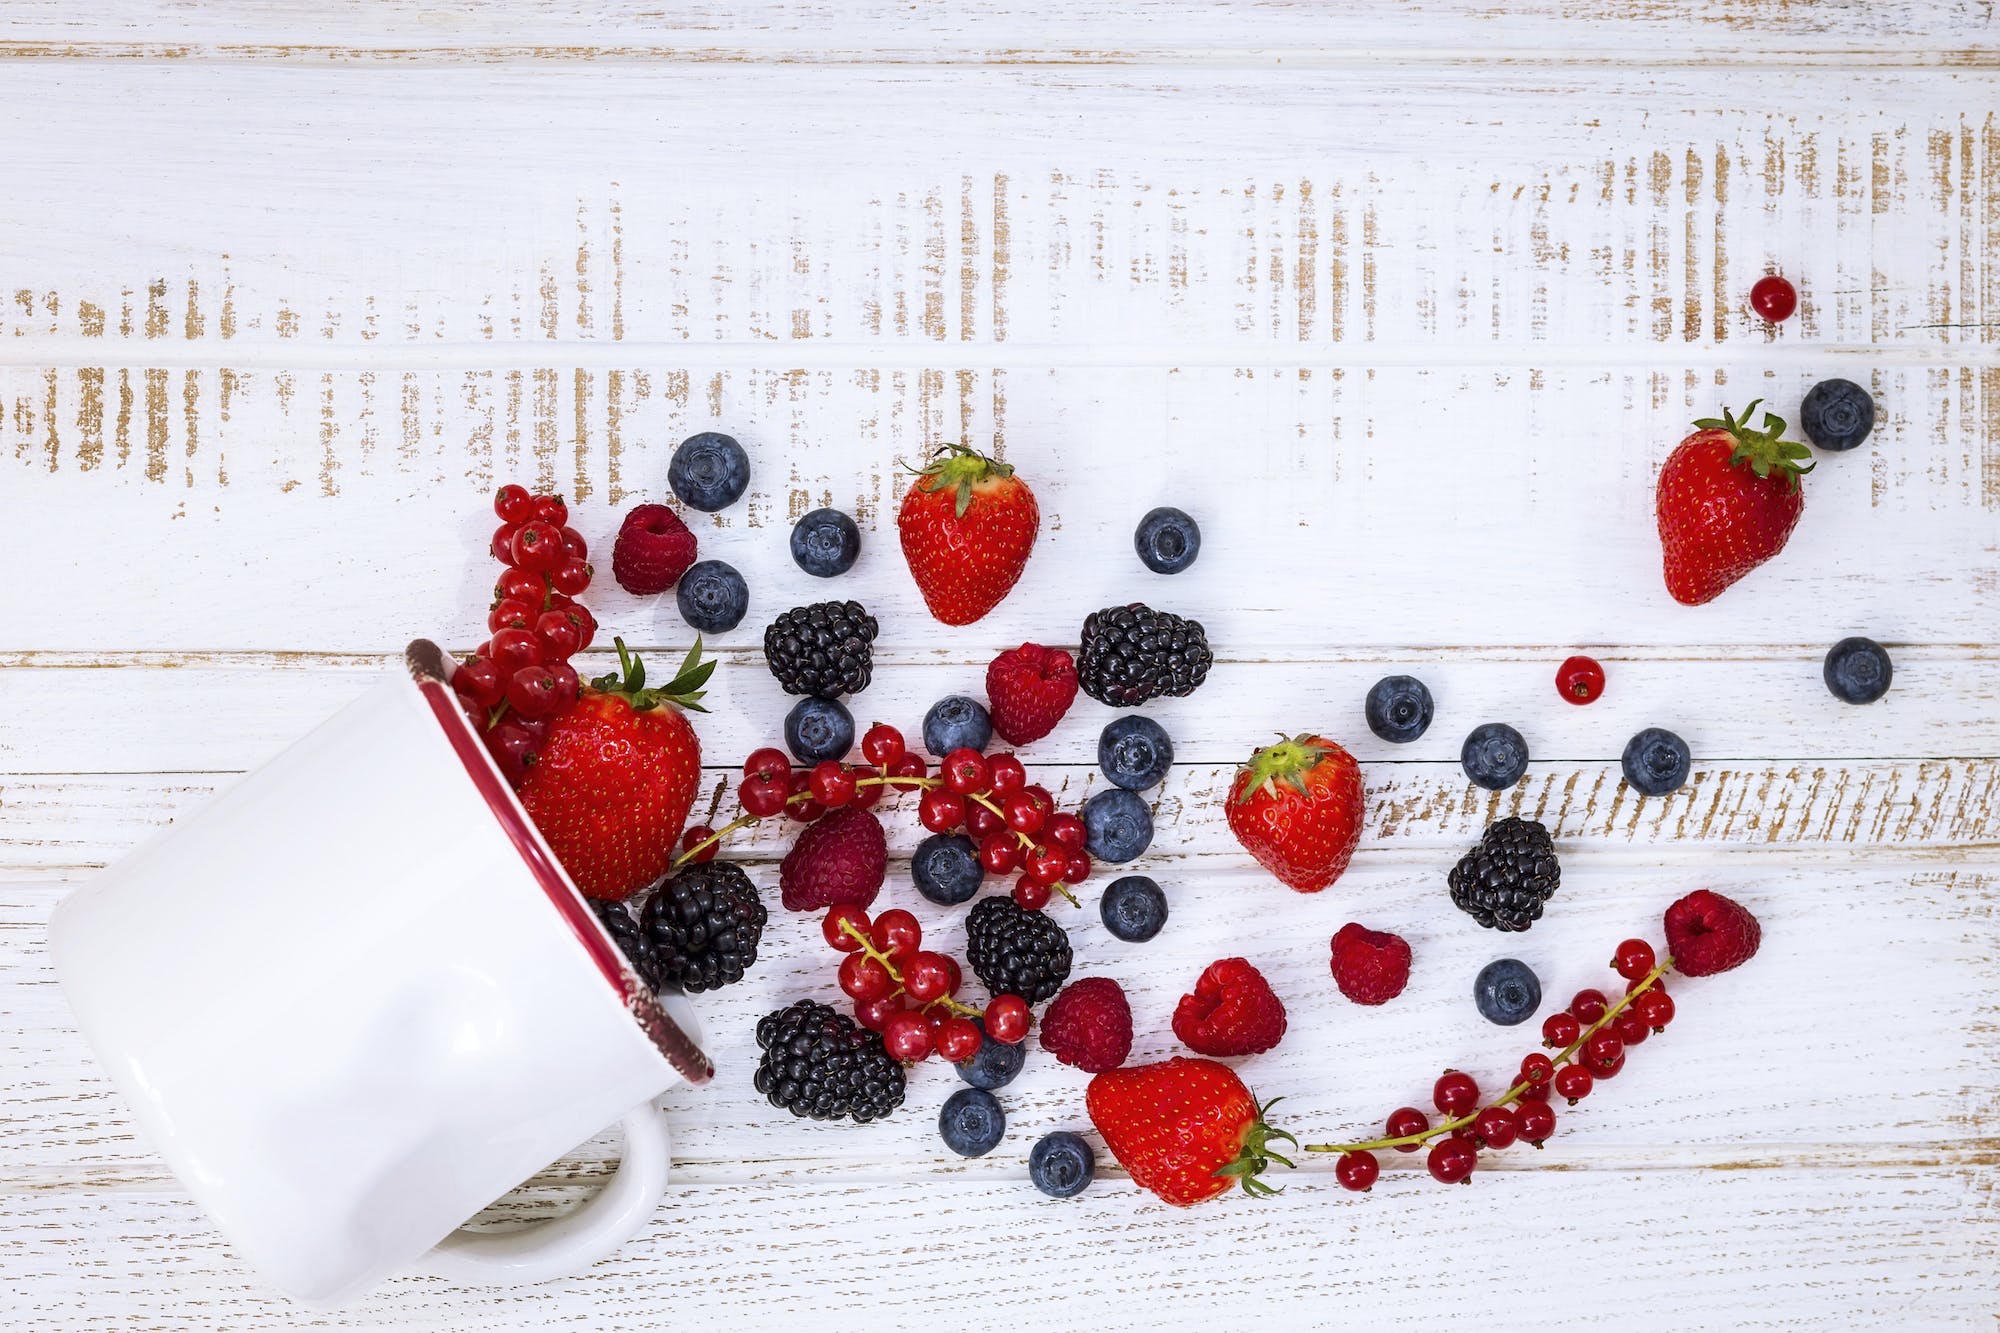 NutriBullet’s Guide to Summer Fruits and Vegetables